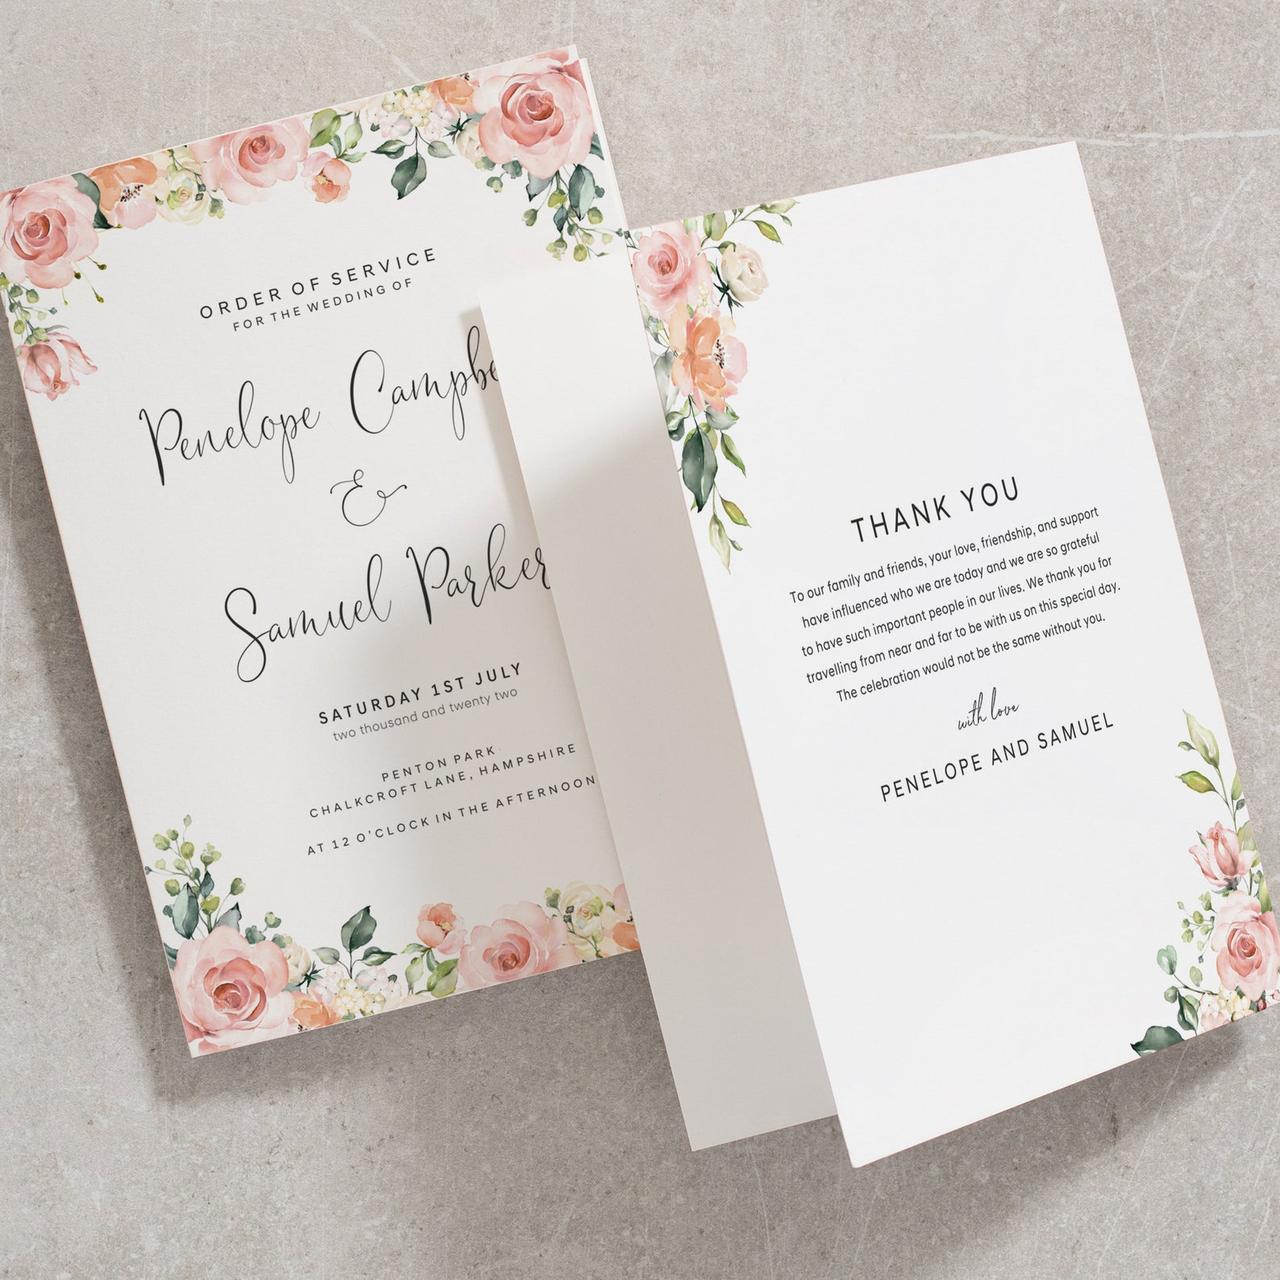 wedding-order-of-service-templates-ideas-advice-hitched-co-uk